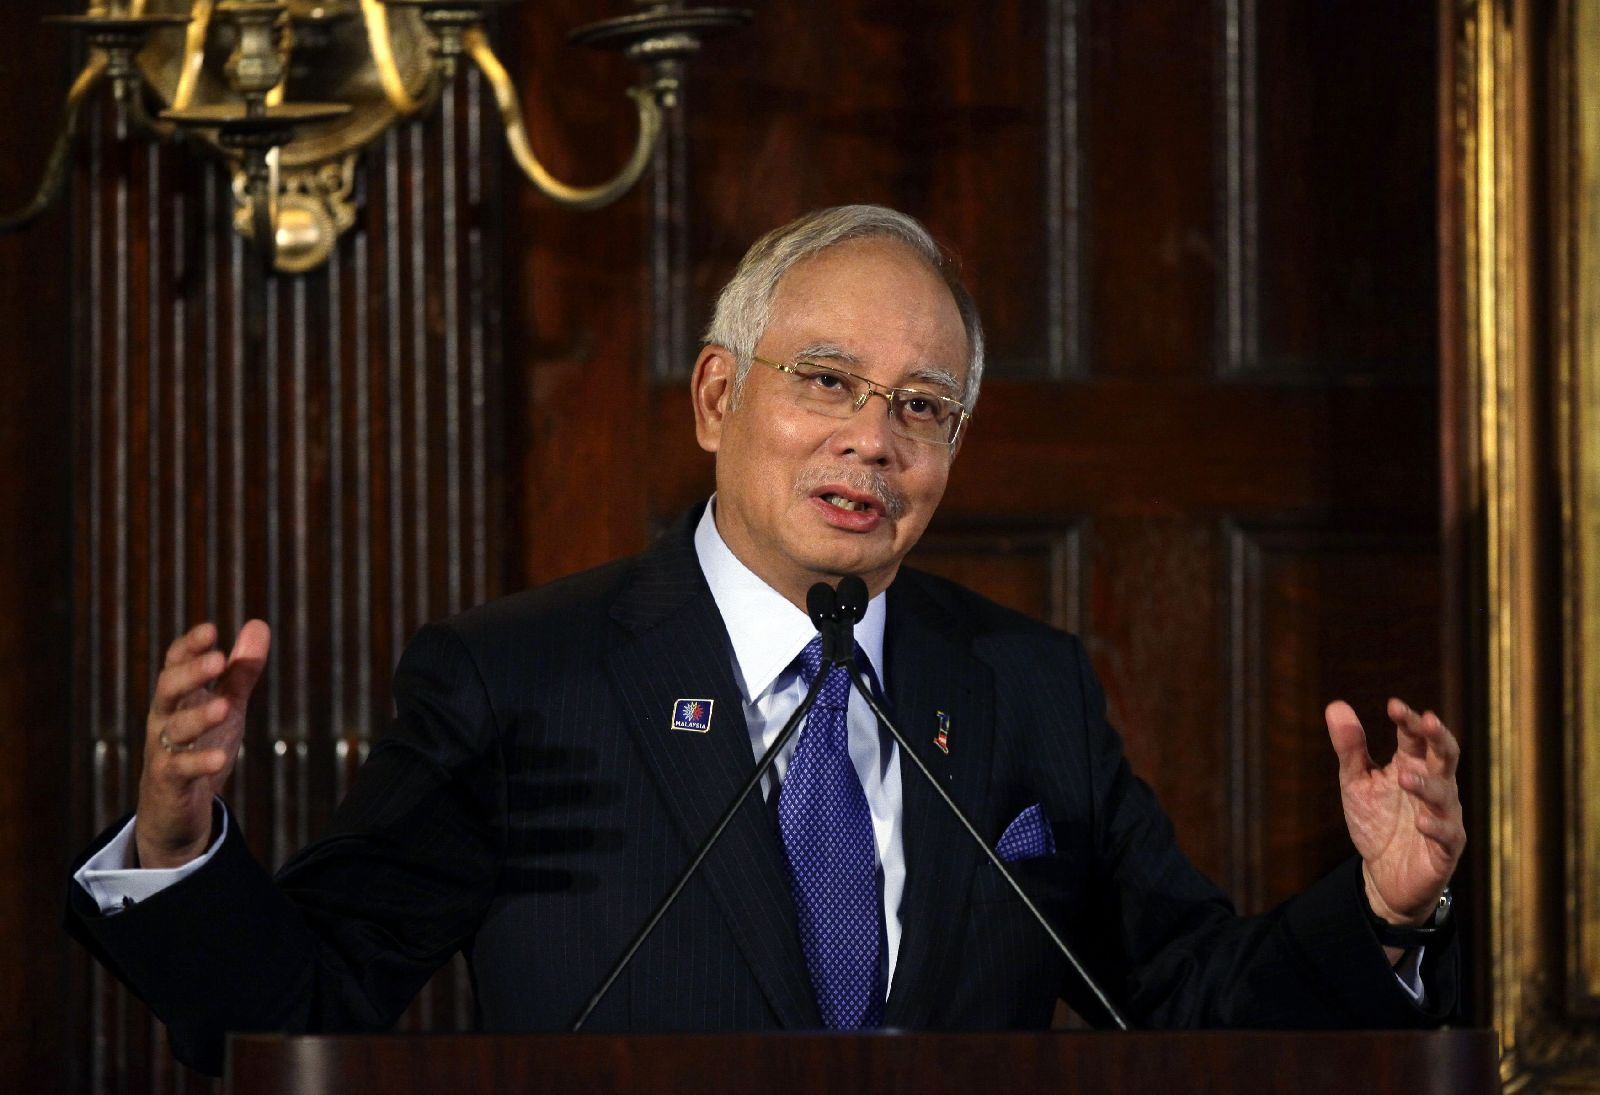 Malaysia Prime Minister Najib Razak speaks at the Harvard Club during the United Nations General Assembly in New York September 25, 2013. u00e2u20acu201d Reuters pic